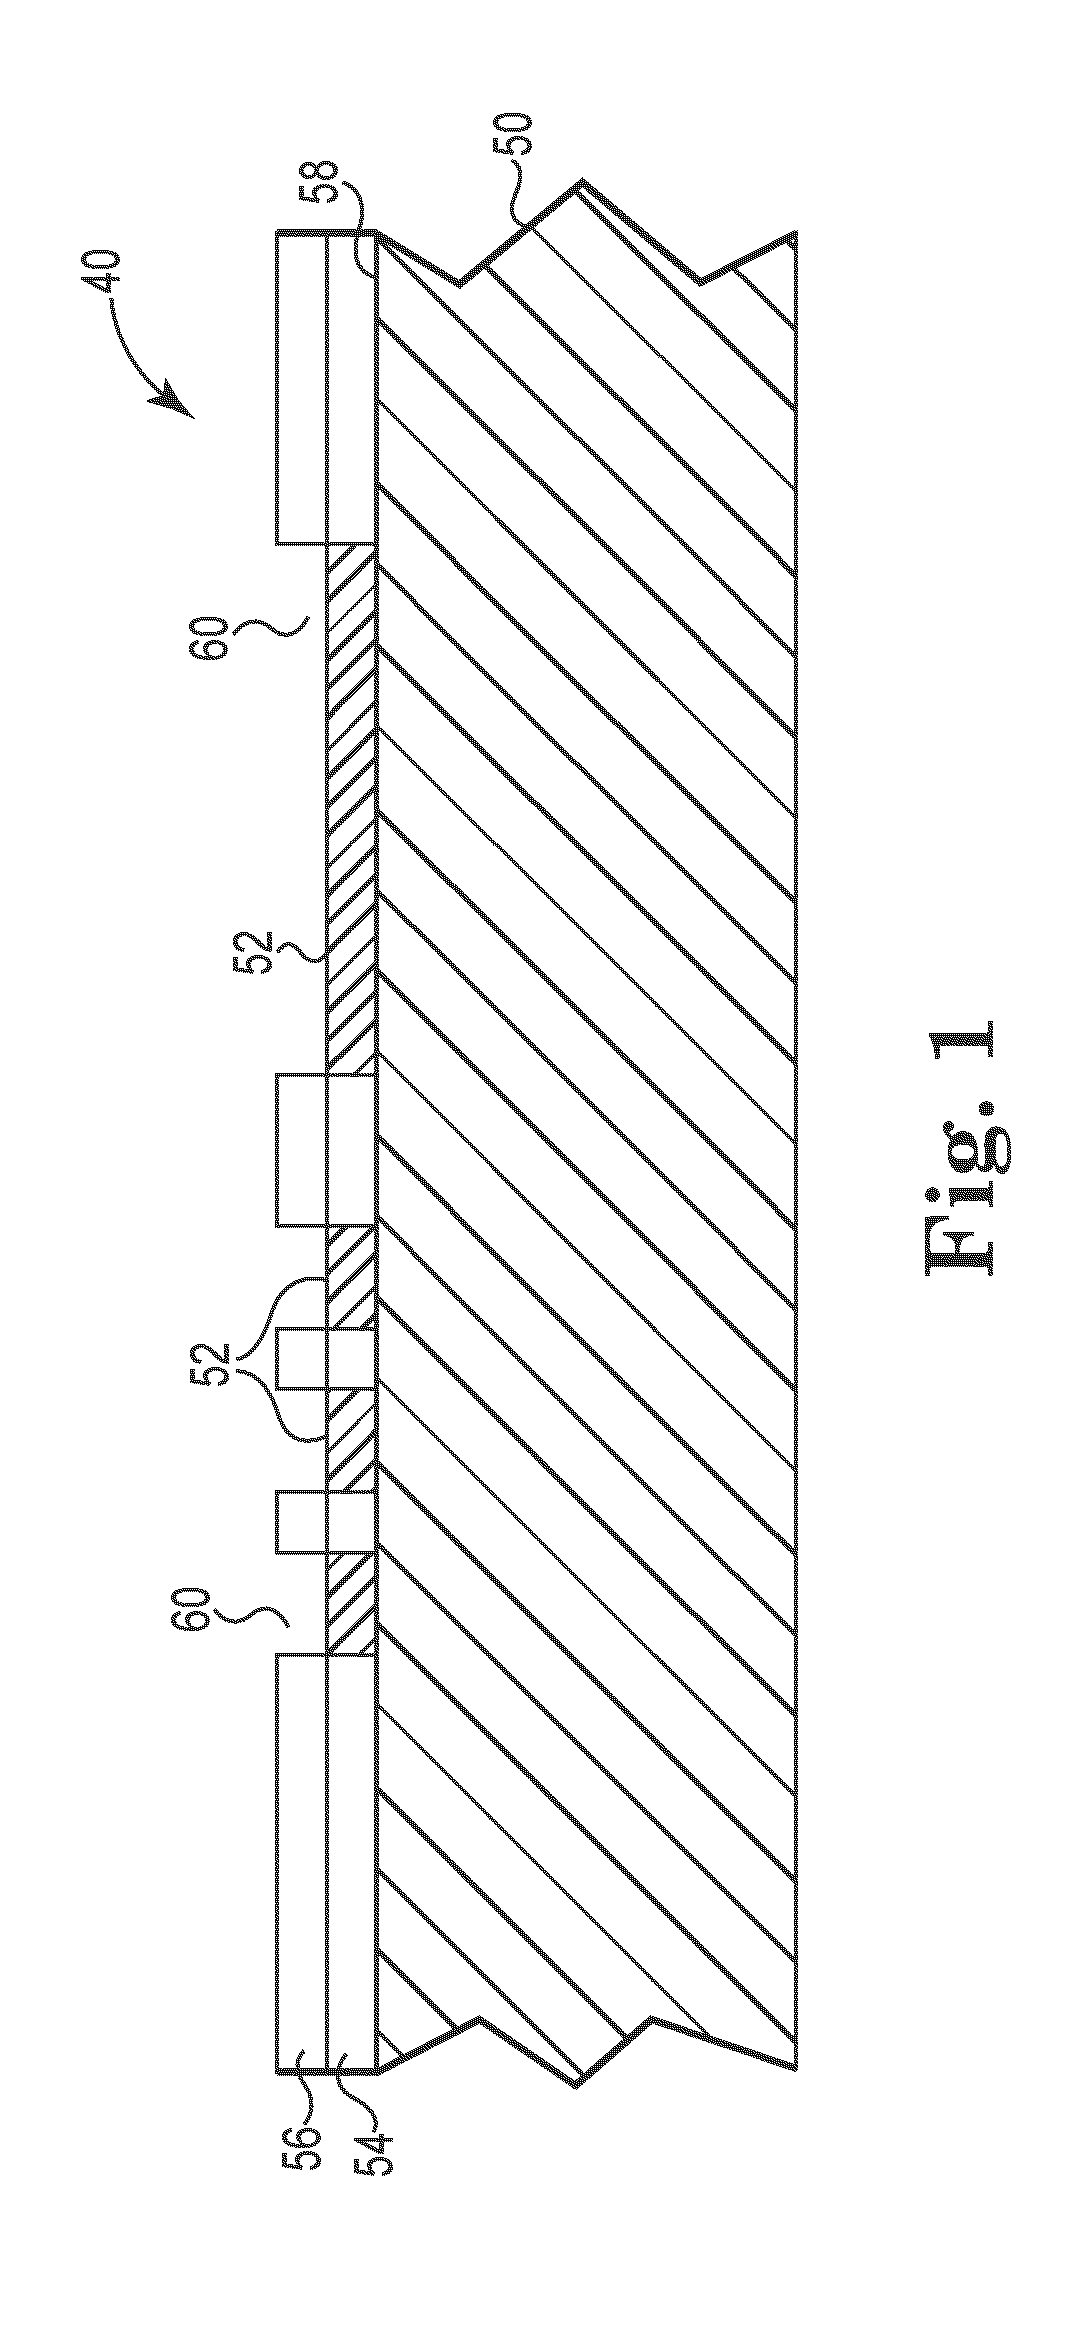 Area array semiconductor device package interconnect structure with optional package-to-package or flexible circuit to package connection